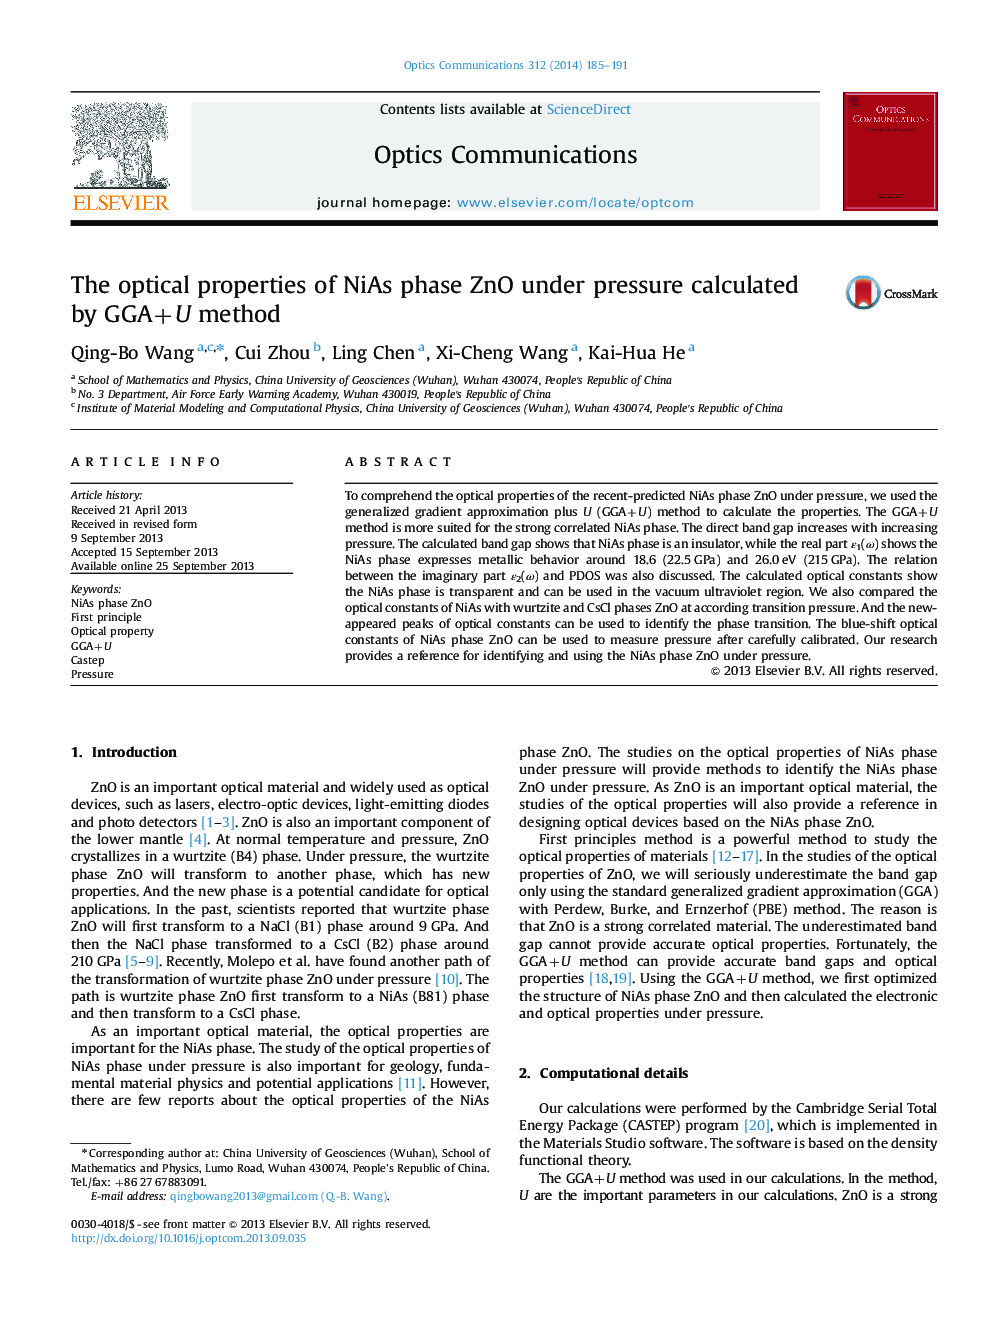 The optical properties of NiAs phase ZnO under pressure calculated by GGA+U method